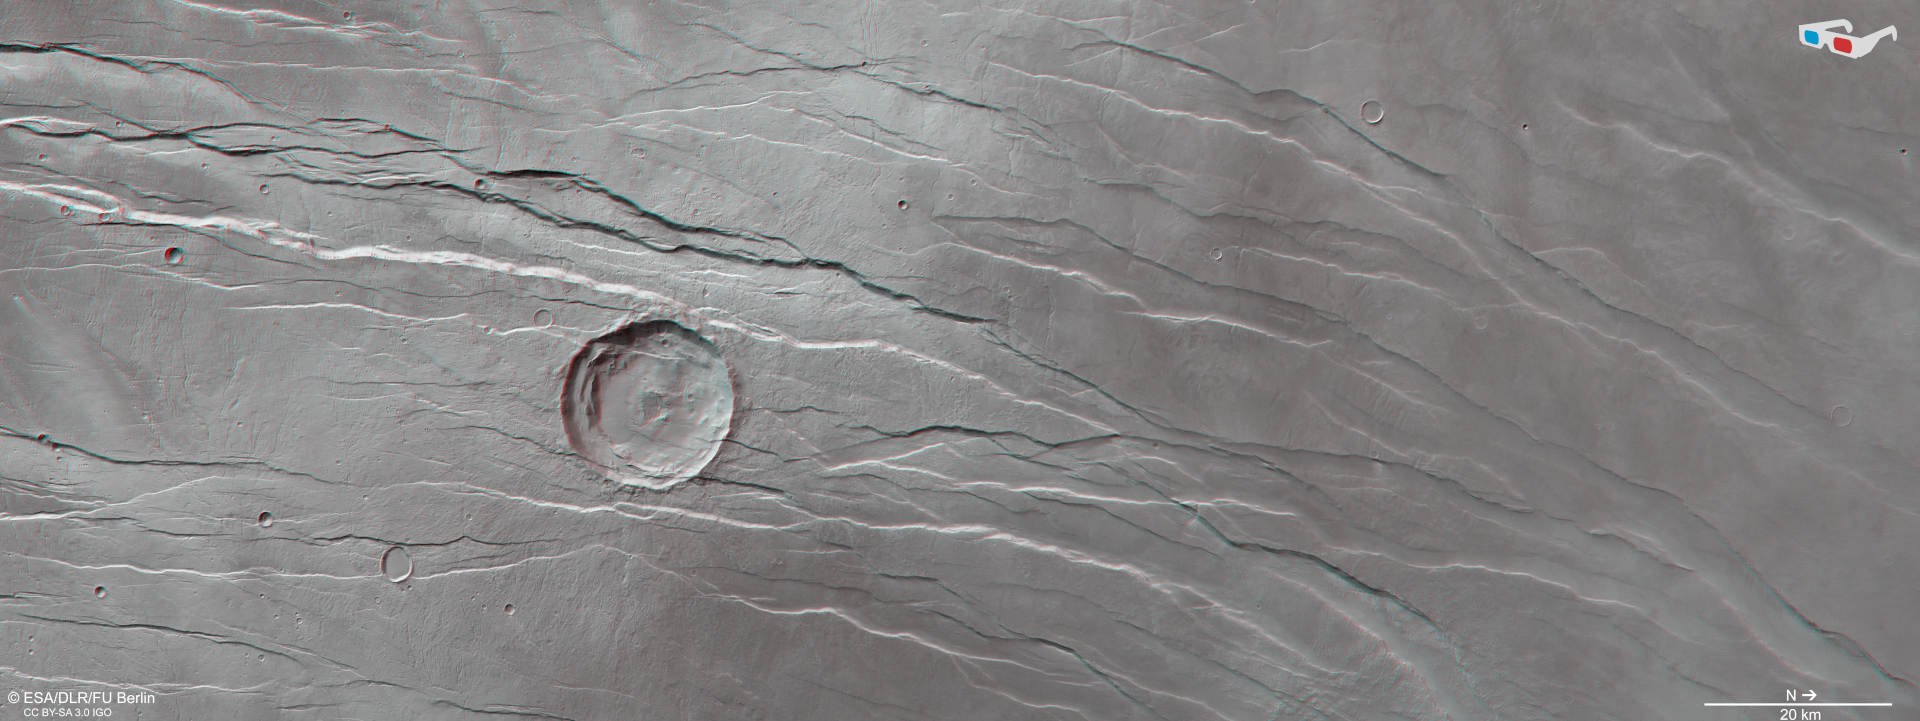 Anaglyph image of the Tantalus Fossae graben system